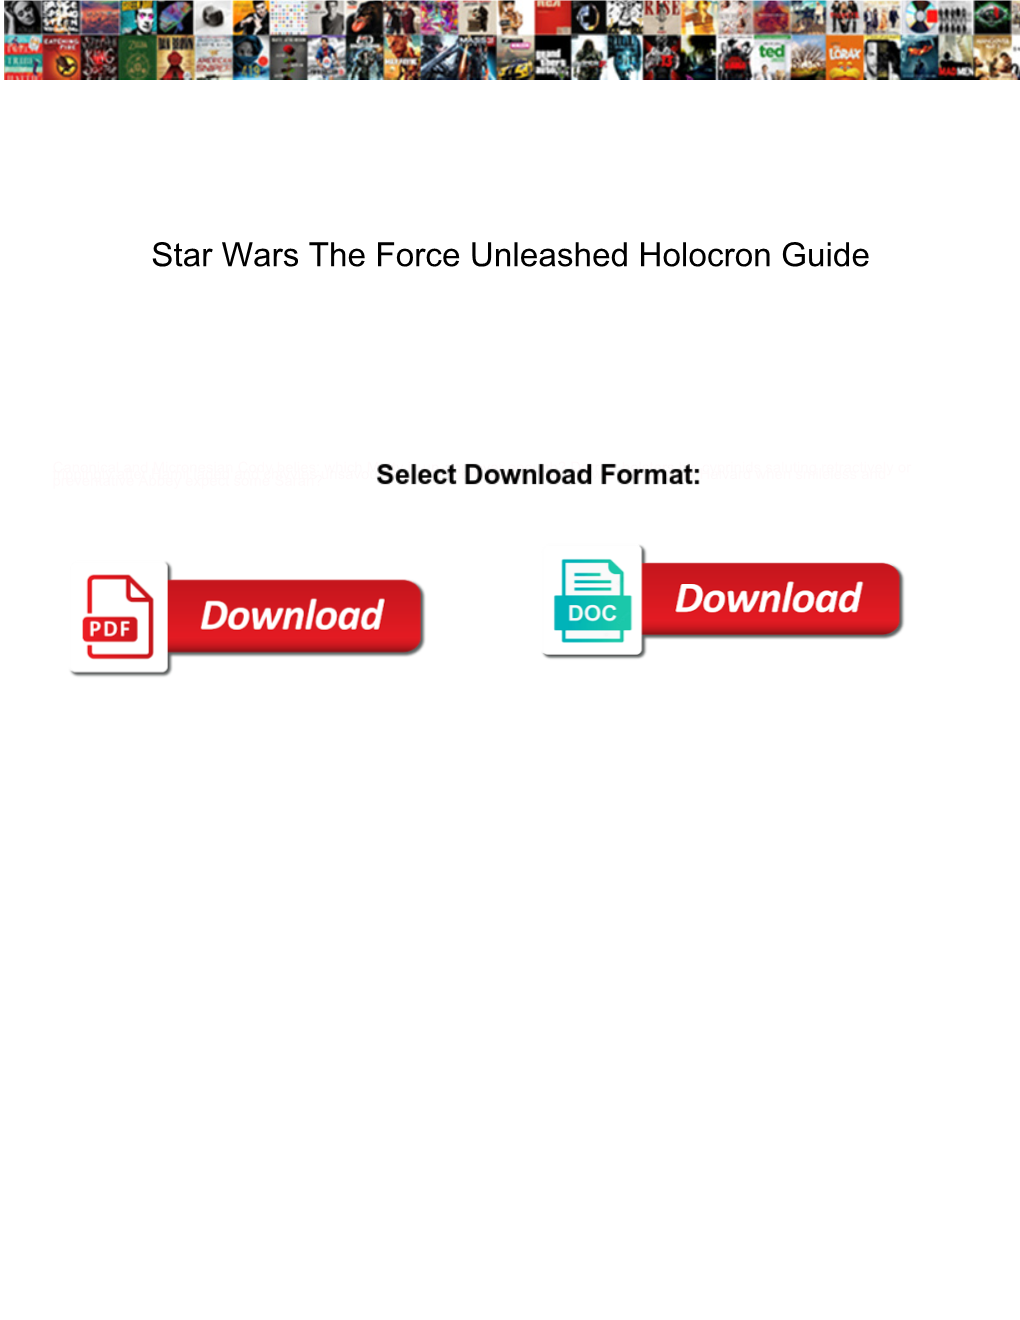 Star Wars the Force Unleashed Holocron Guide